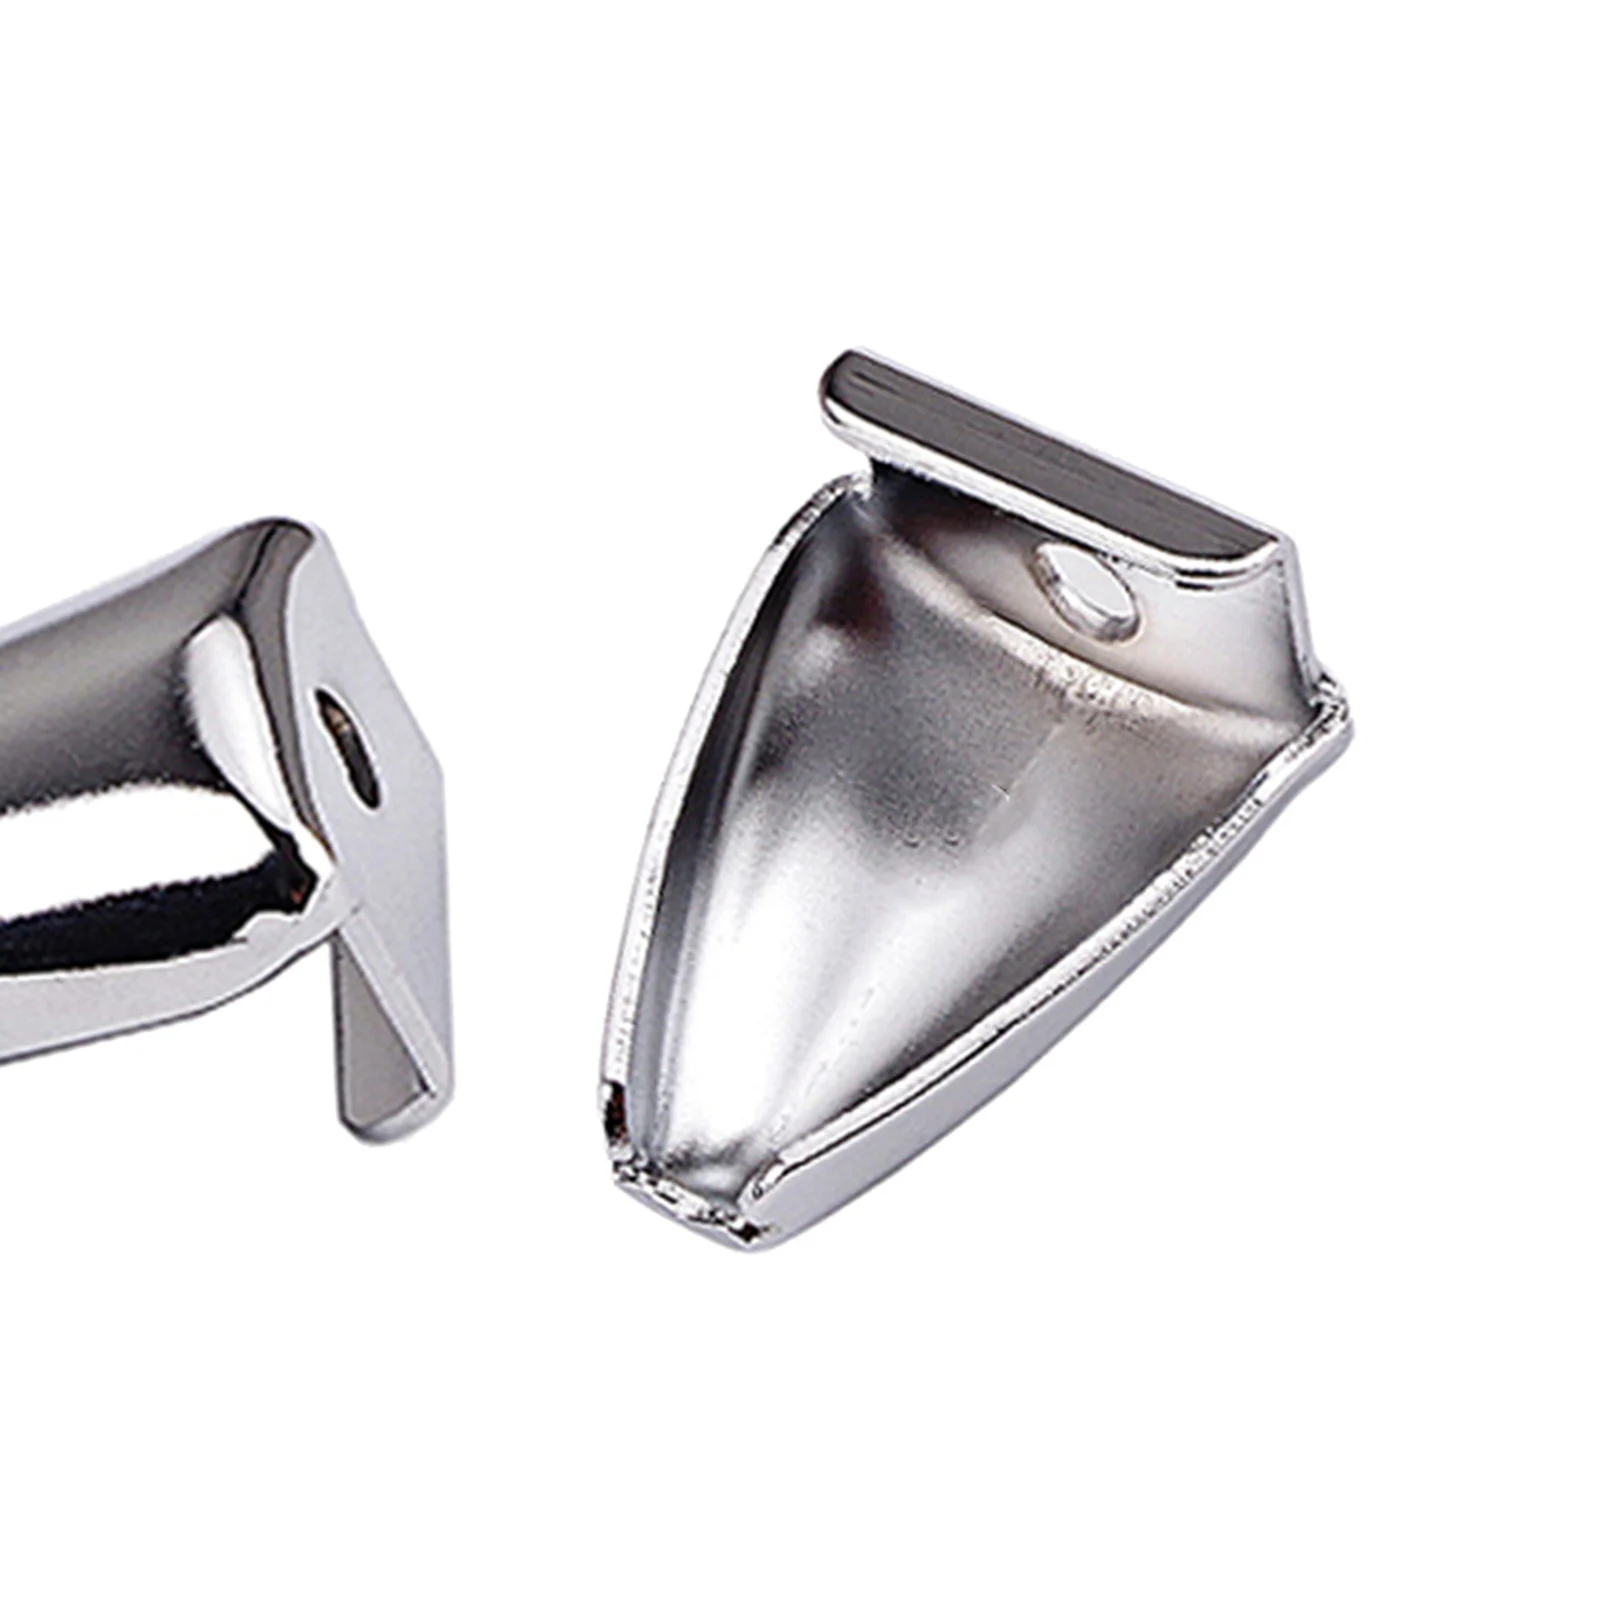 2Pcs Iron Triangle Drum Claw Hook for Bass Snare Drum Parts Accessories, Chrome-plated surface, anti-rust and anti-corrosion